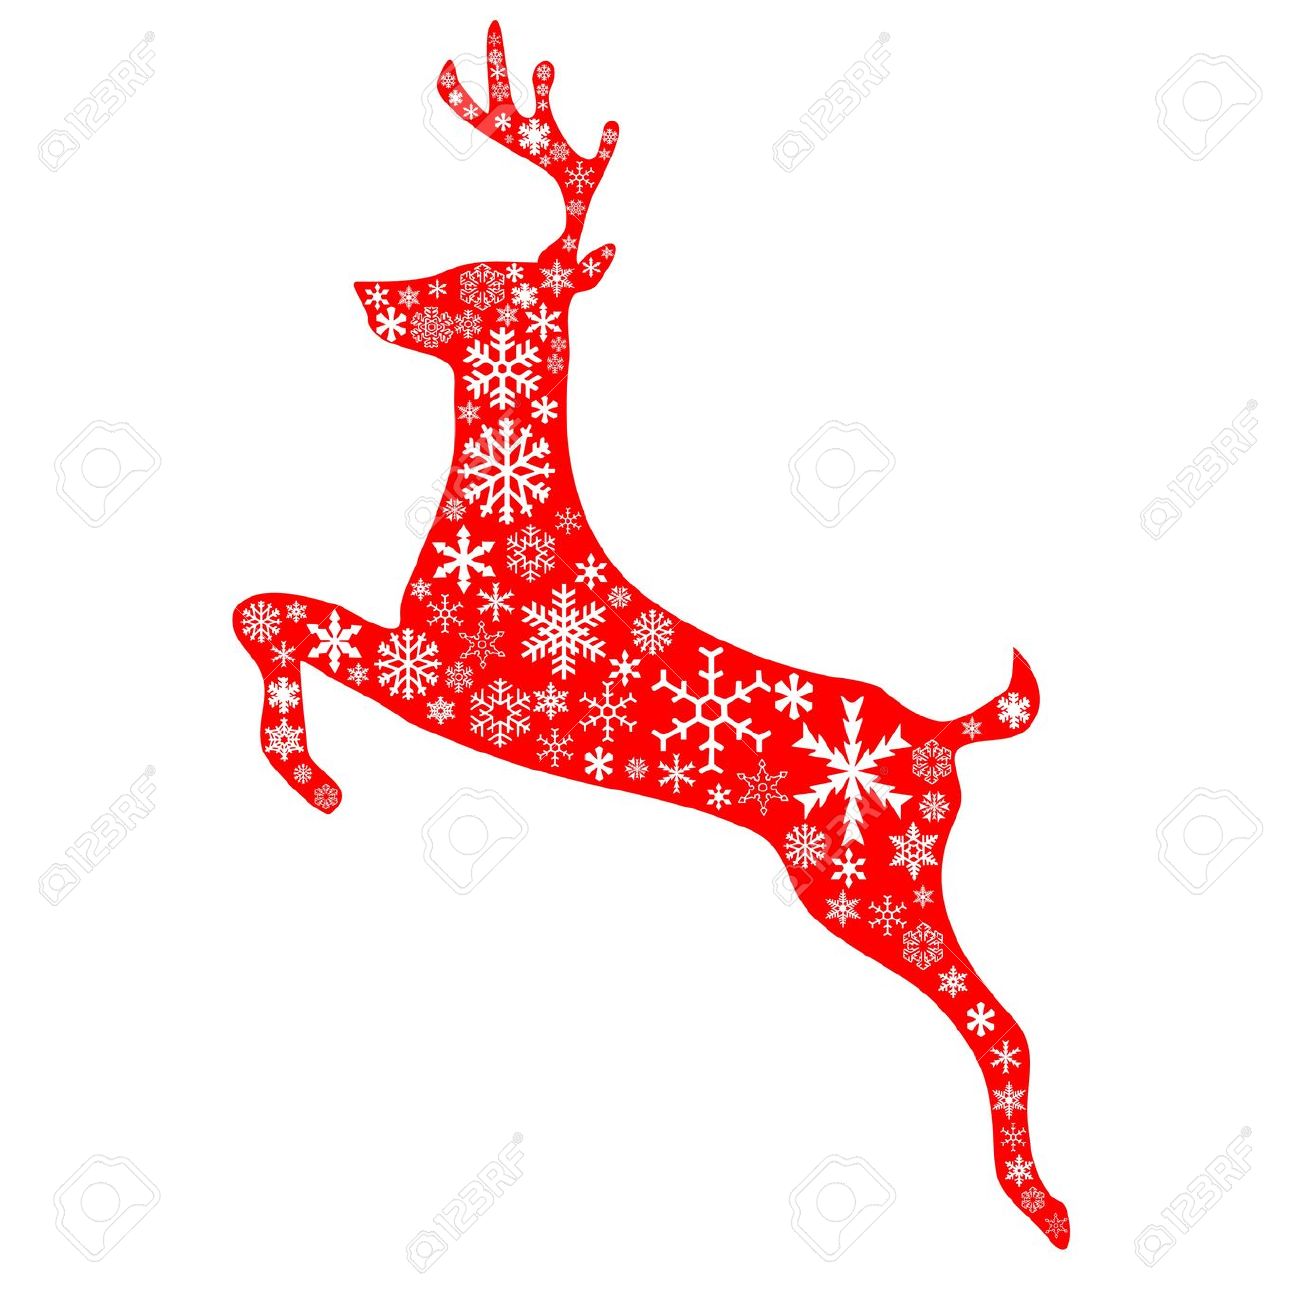 A Jumping Reindeer In Christmas Red Background And White.